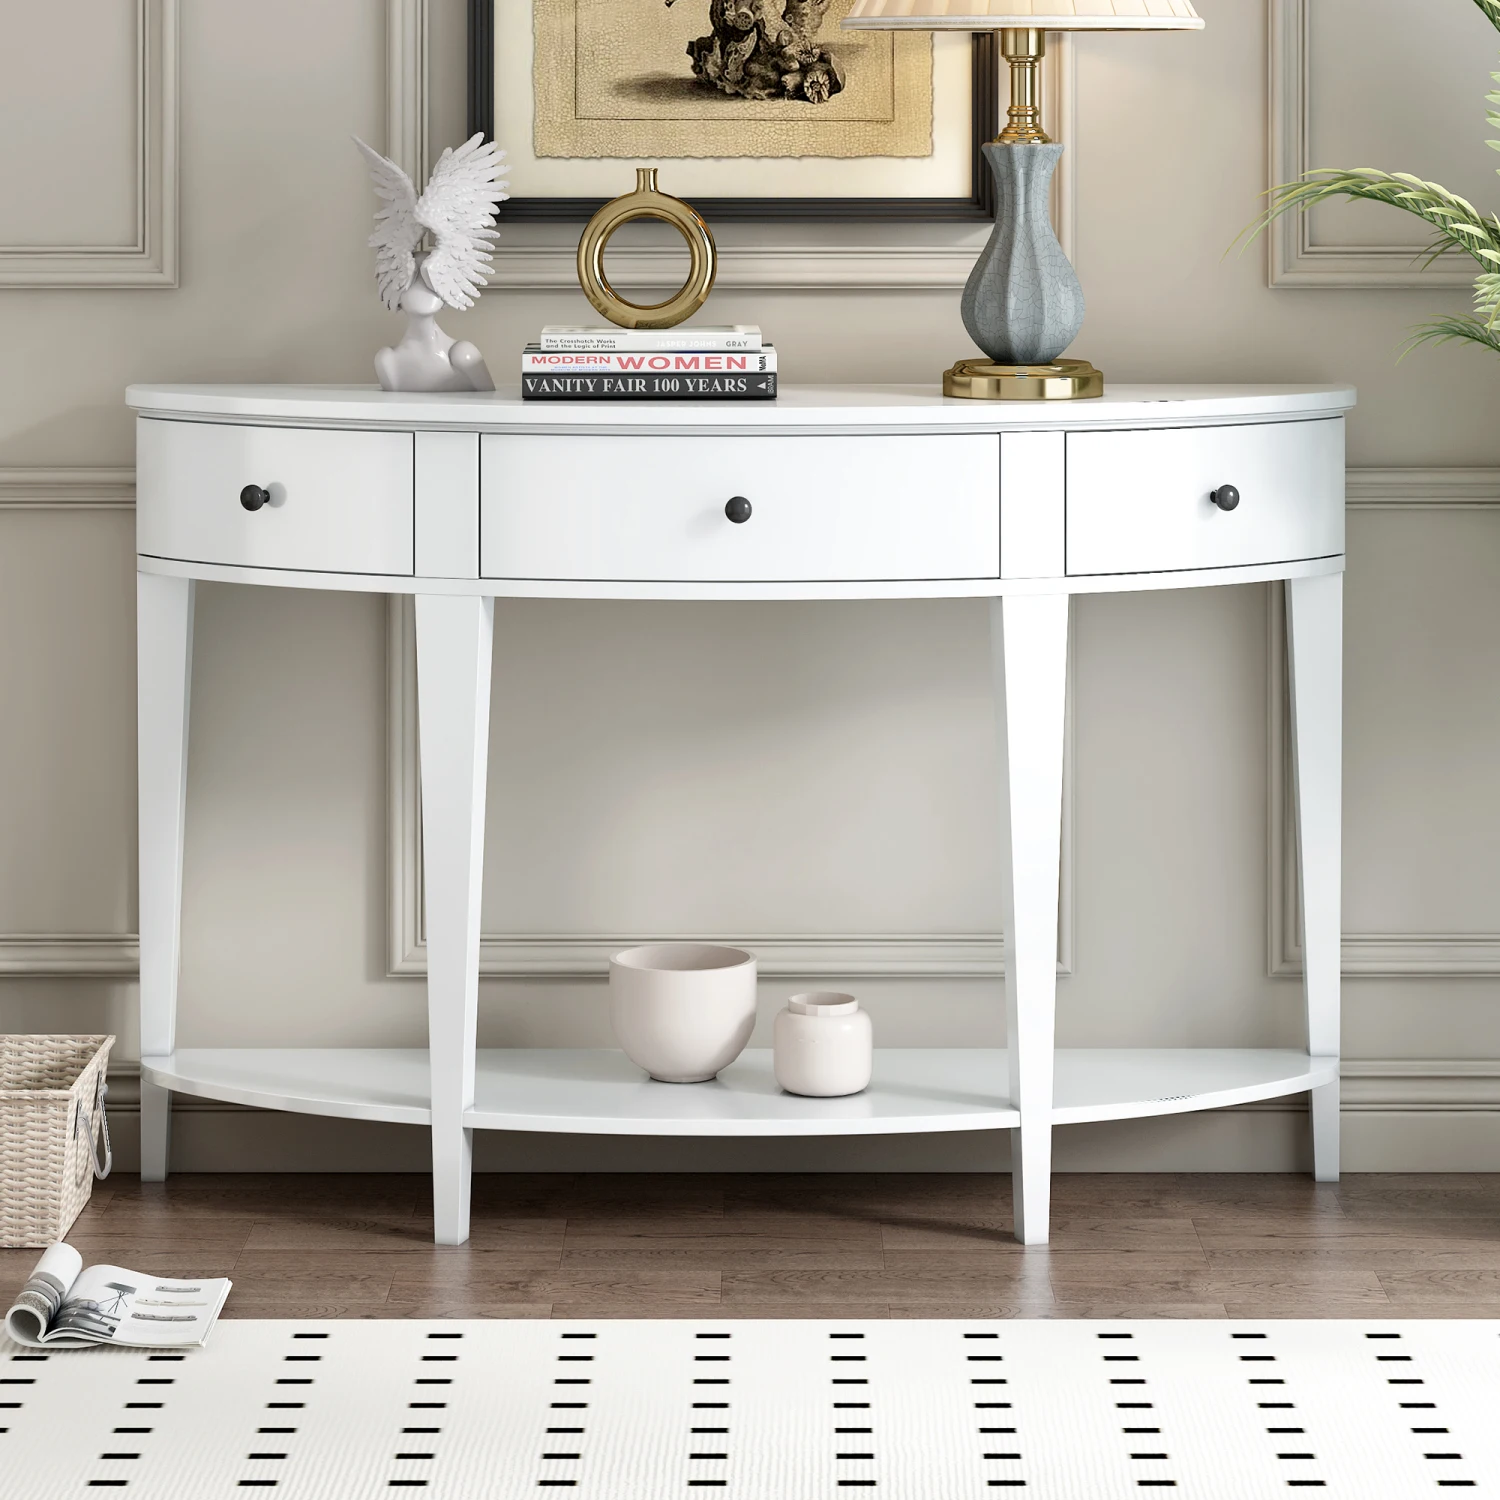 

U-Style Modern Curved Console Table Sofa Table with 3 drawers and 1 Shelf for Hallway, Entryway, Living Room